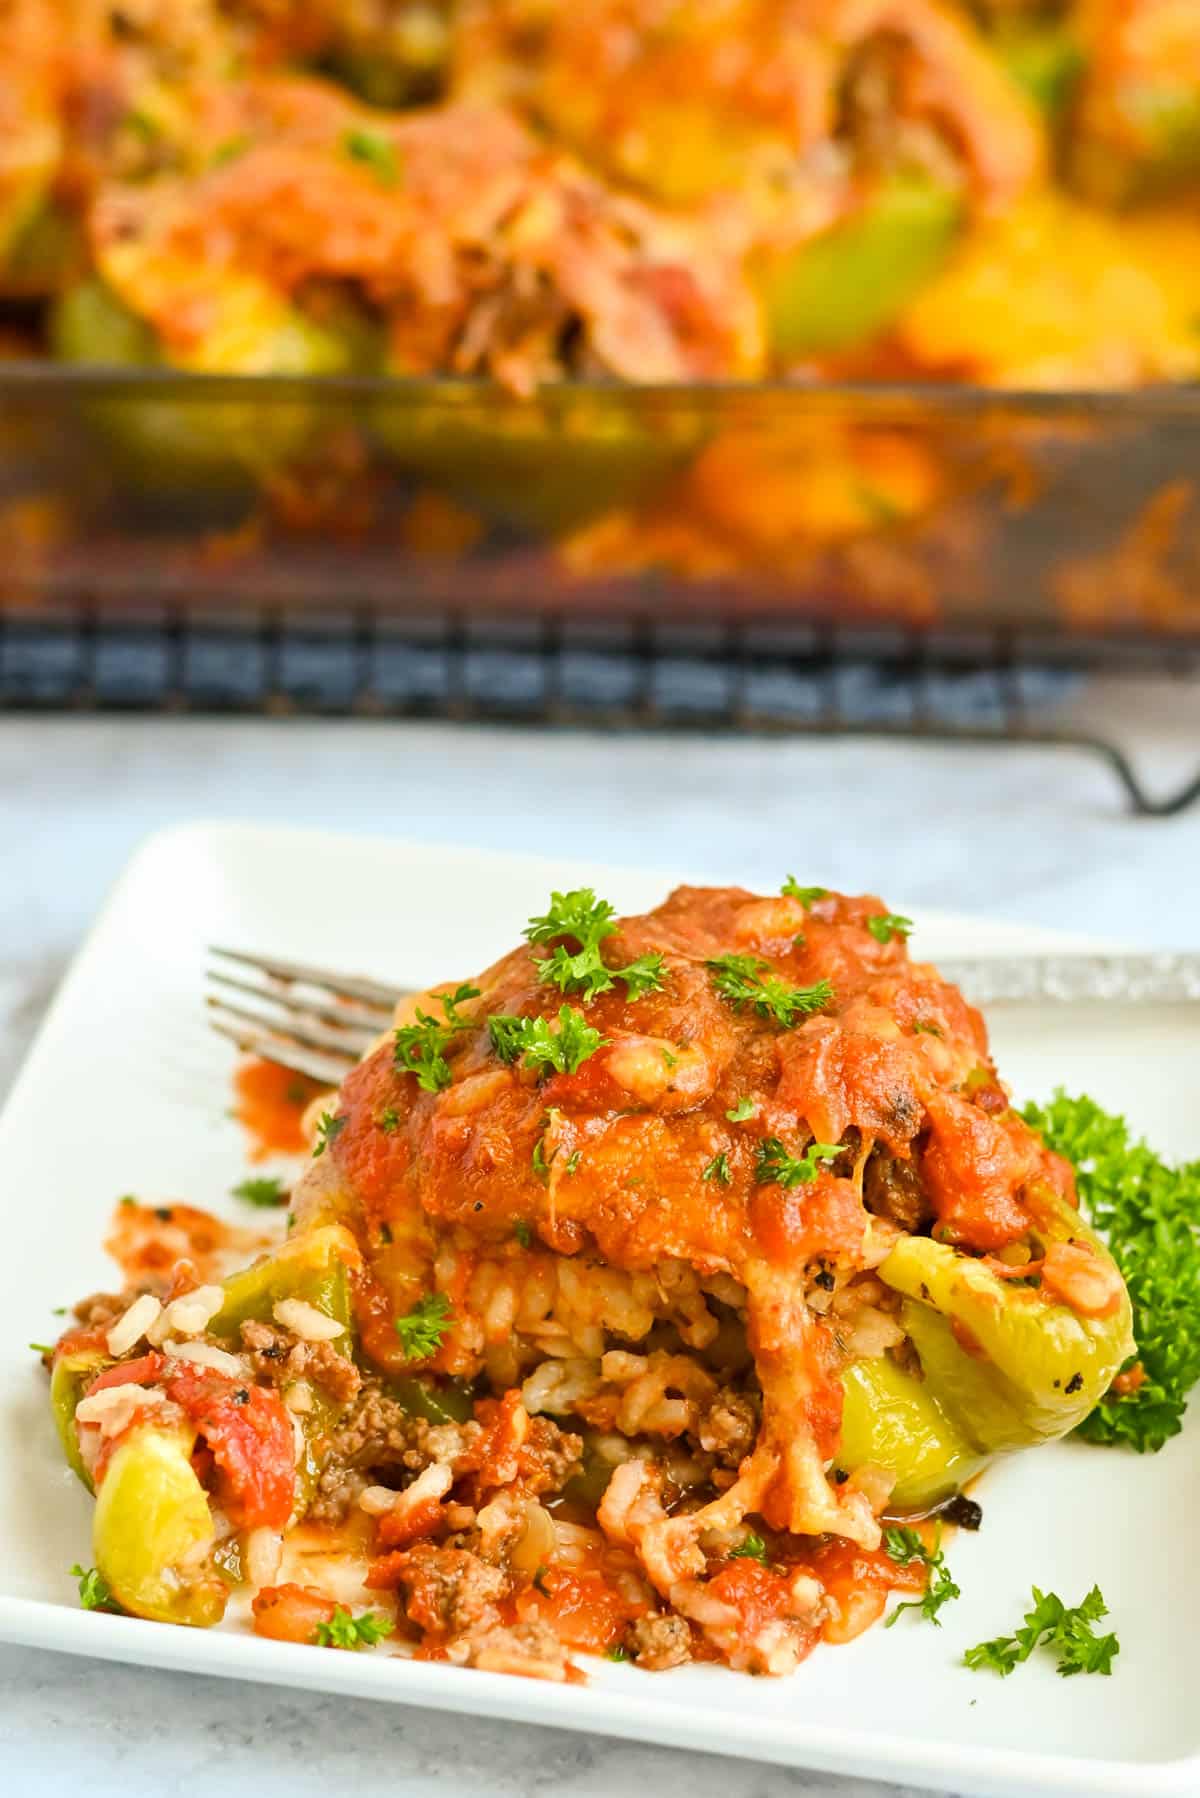 A plate with a stuffed green bell pepper topped with tomato sauce and parsley; a casserole dish in the background.